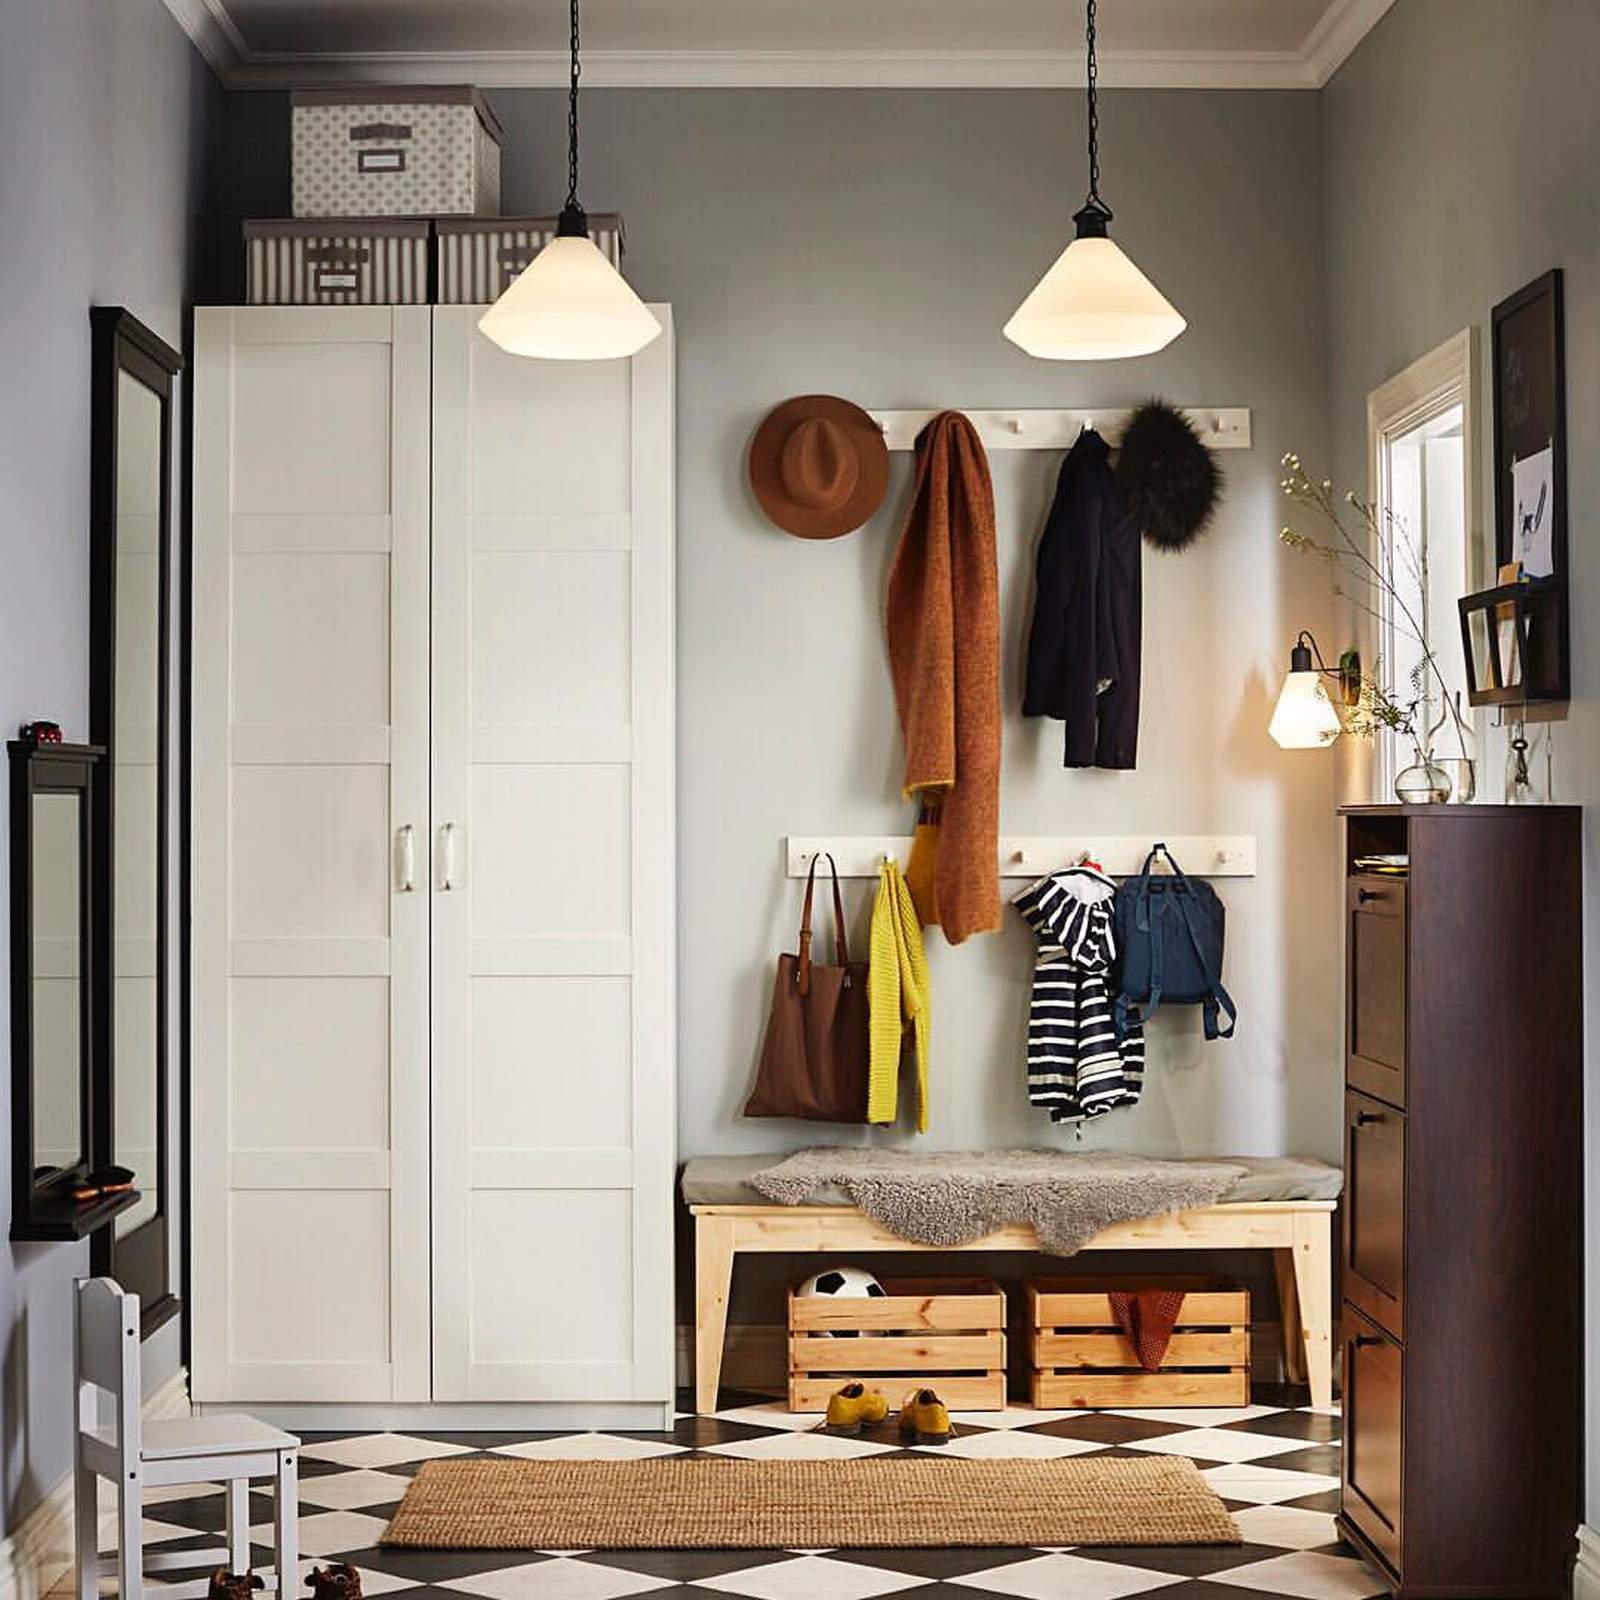 21 Amazing Mudroom Ideas That Makes A Home Looks More Luxury